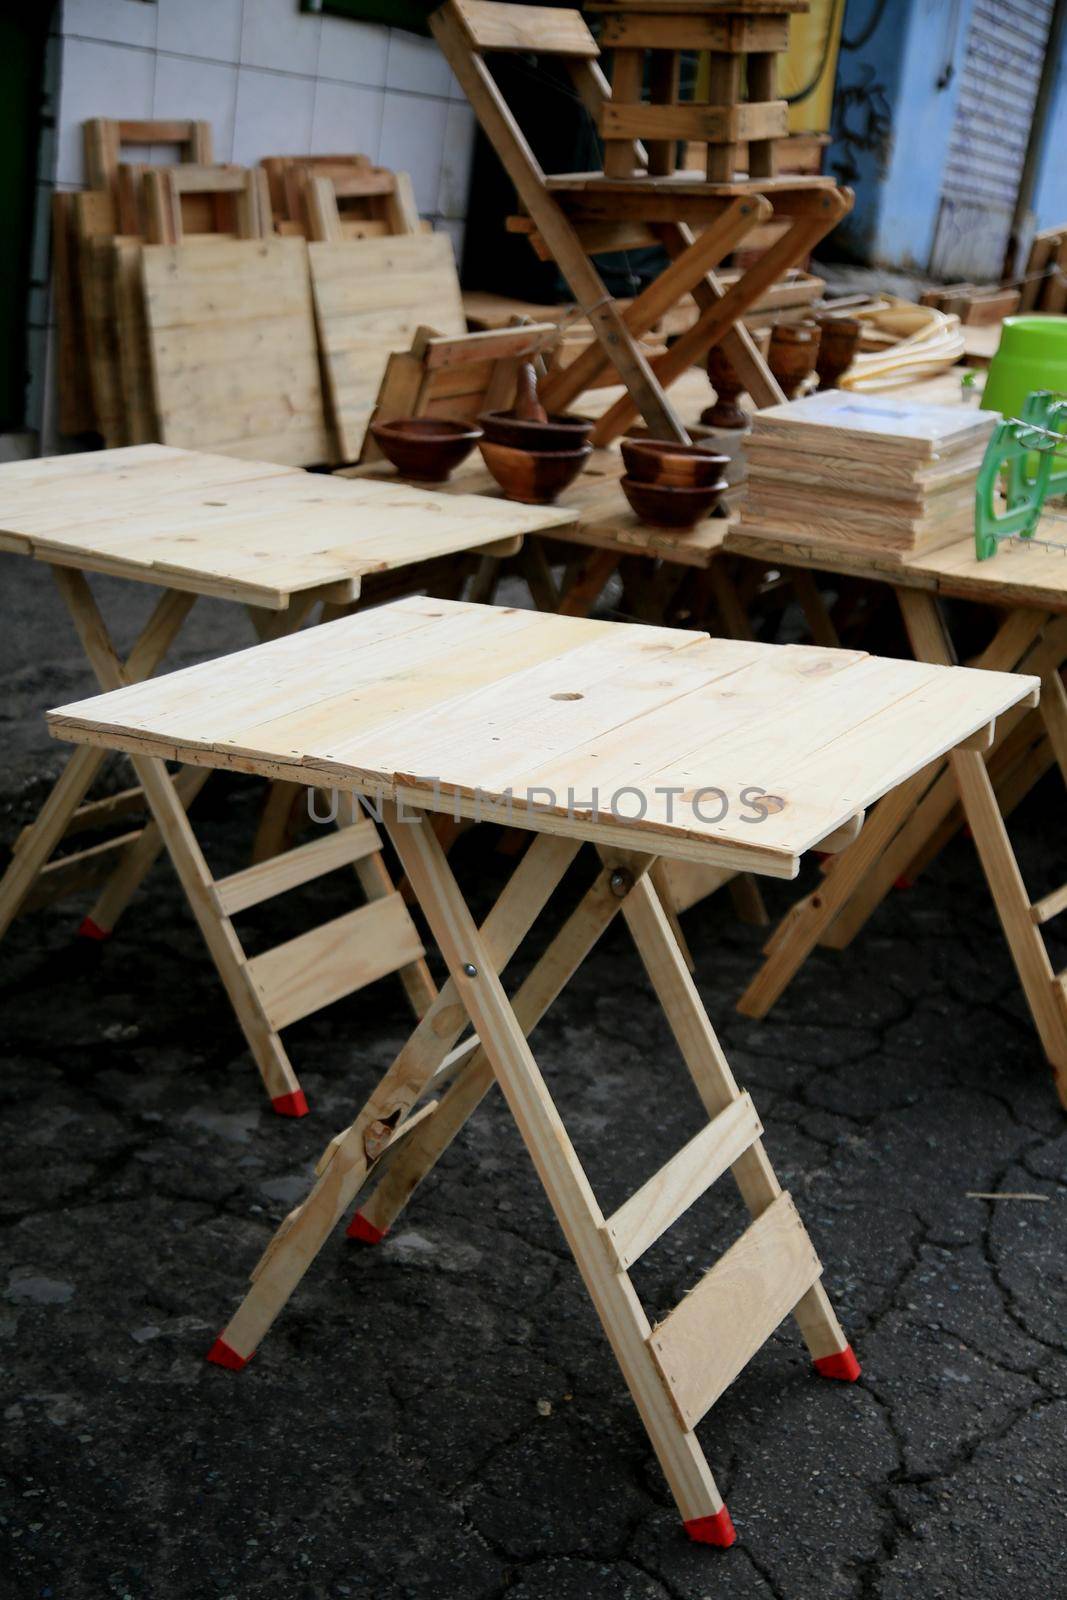 salvador, bahia, brazil - july 6, 2021: Table made of demolition wood is seen for sale in Salvador city.